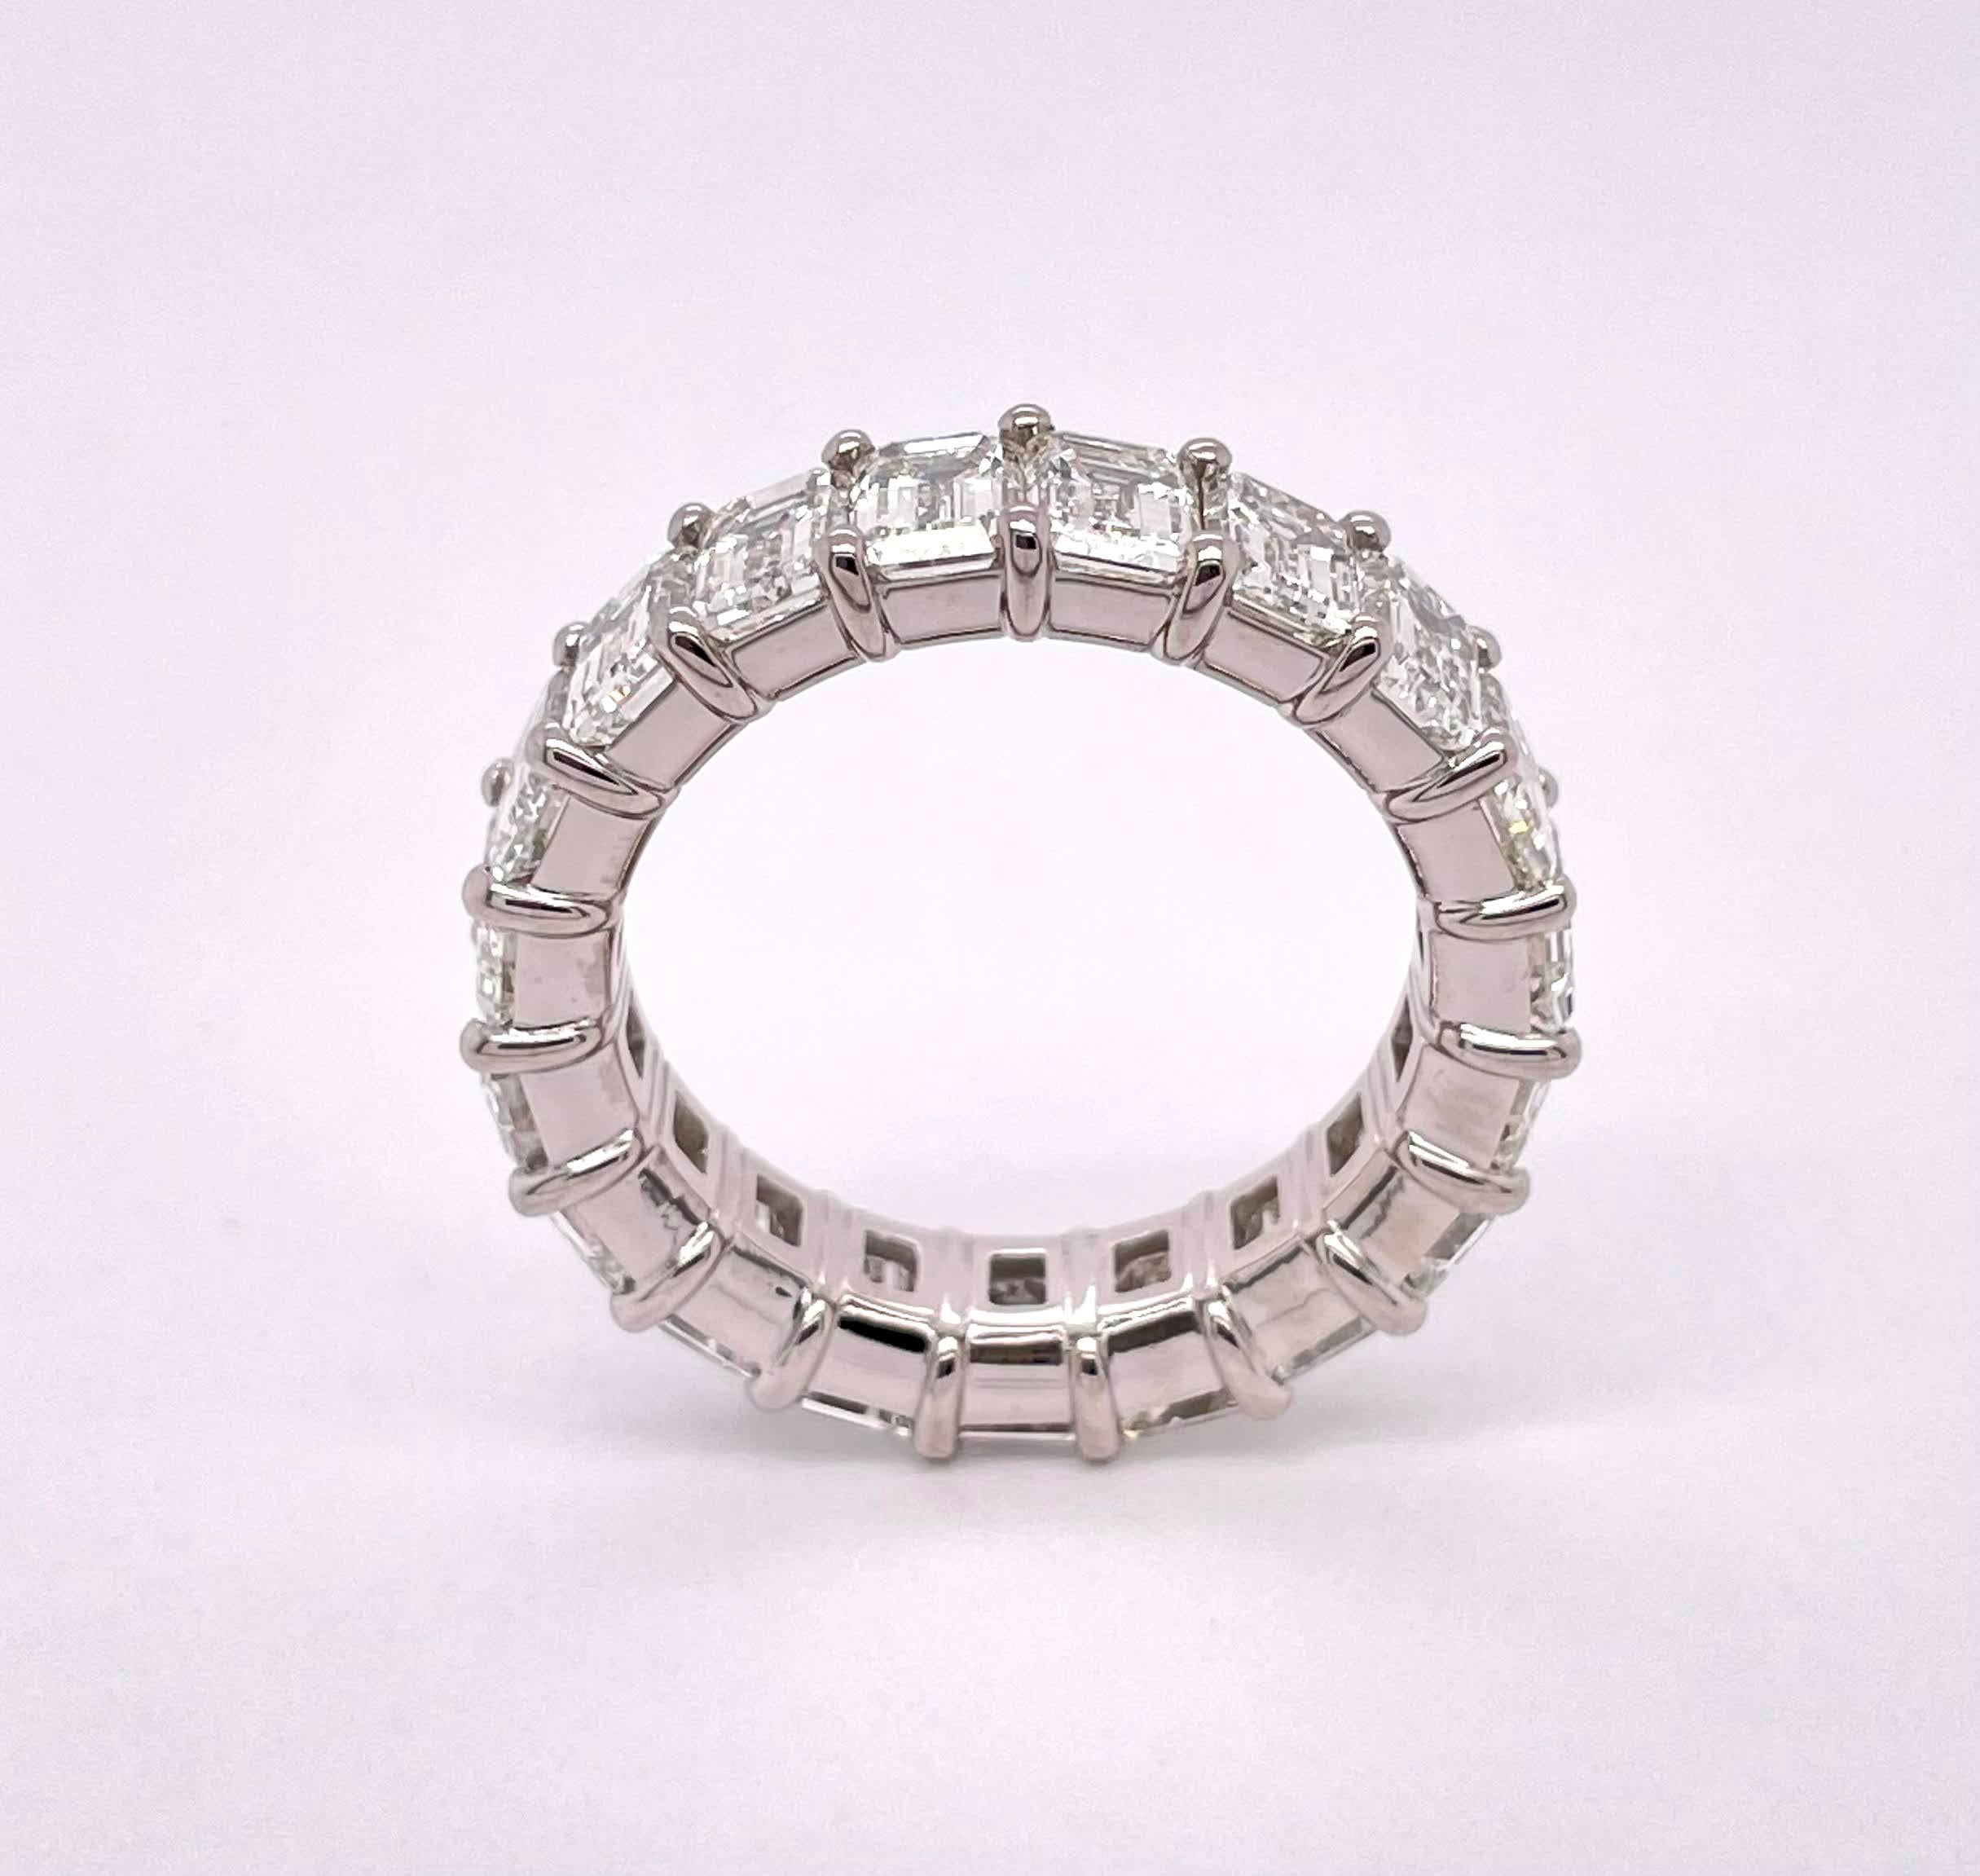 Classic Eternity Ring with 7.66 carats of 19 Emerald Cuts diamonds with FG color, VS clarity is elegantly mounted on a Platinum setting.
We custom any eternity ring in any size and any length.
Price will be adjusted accordingly.